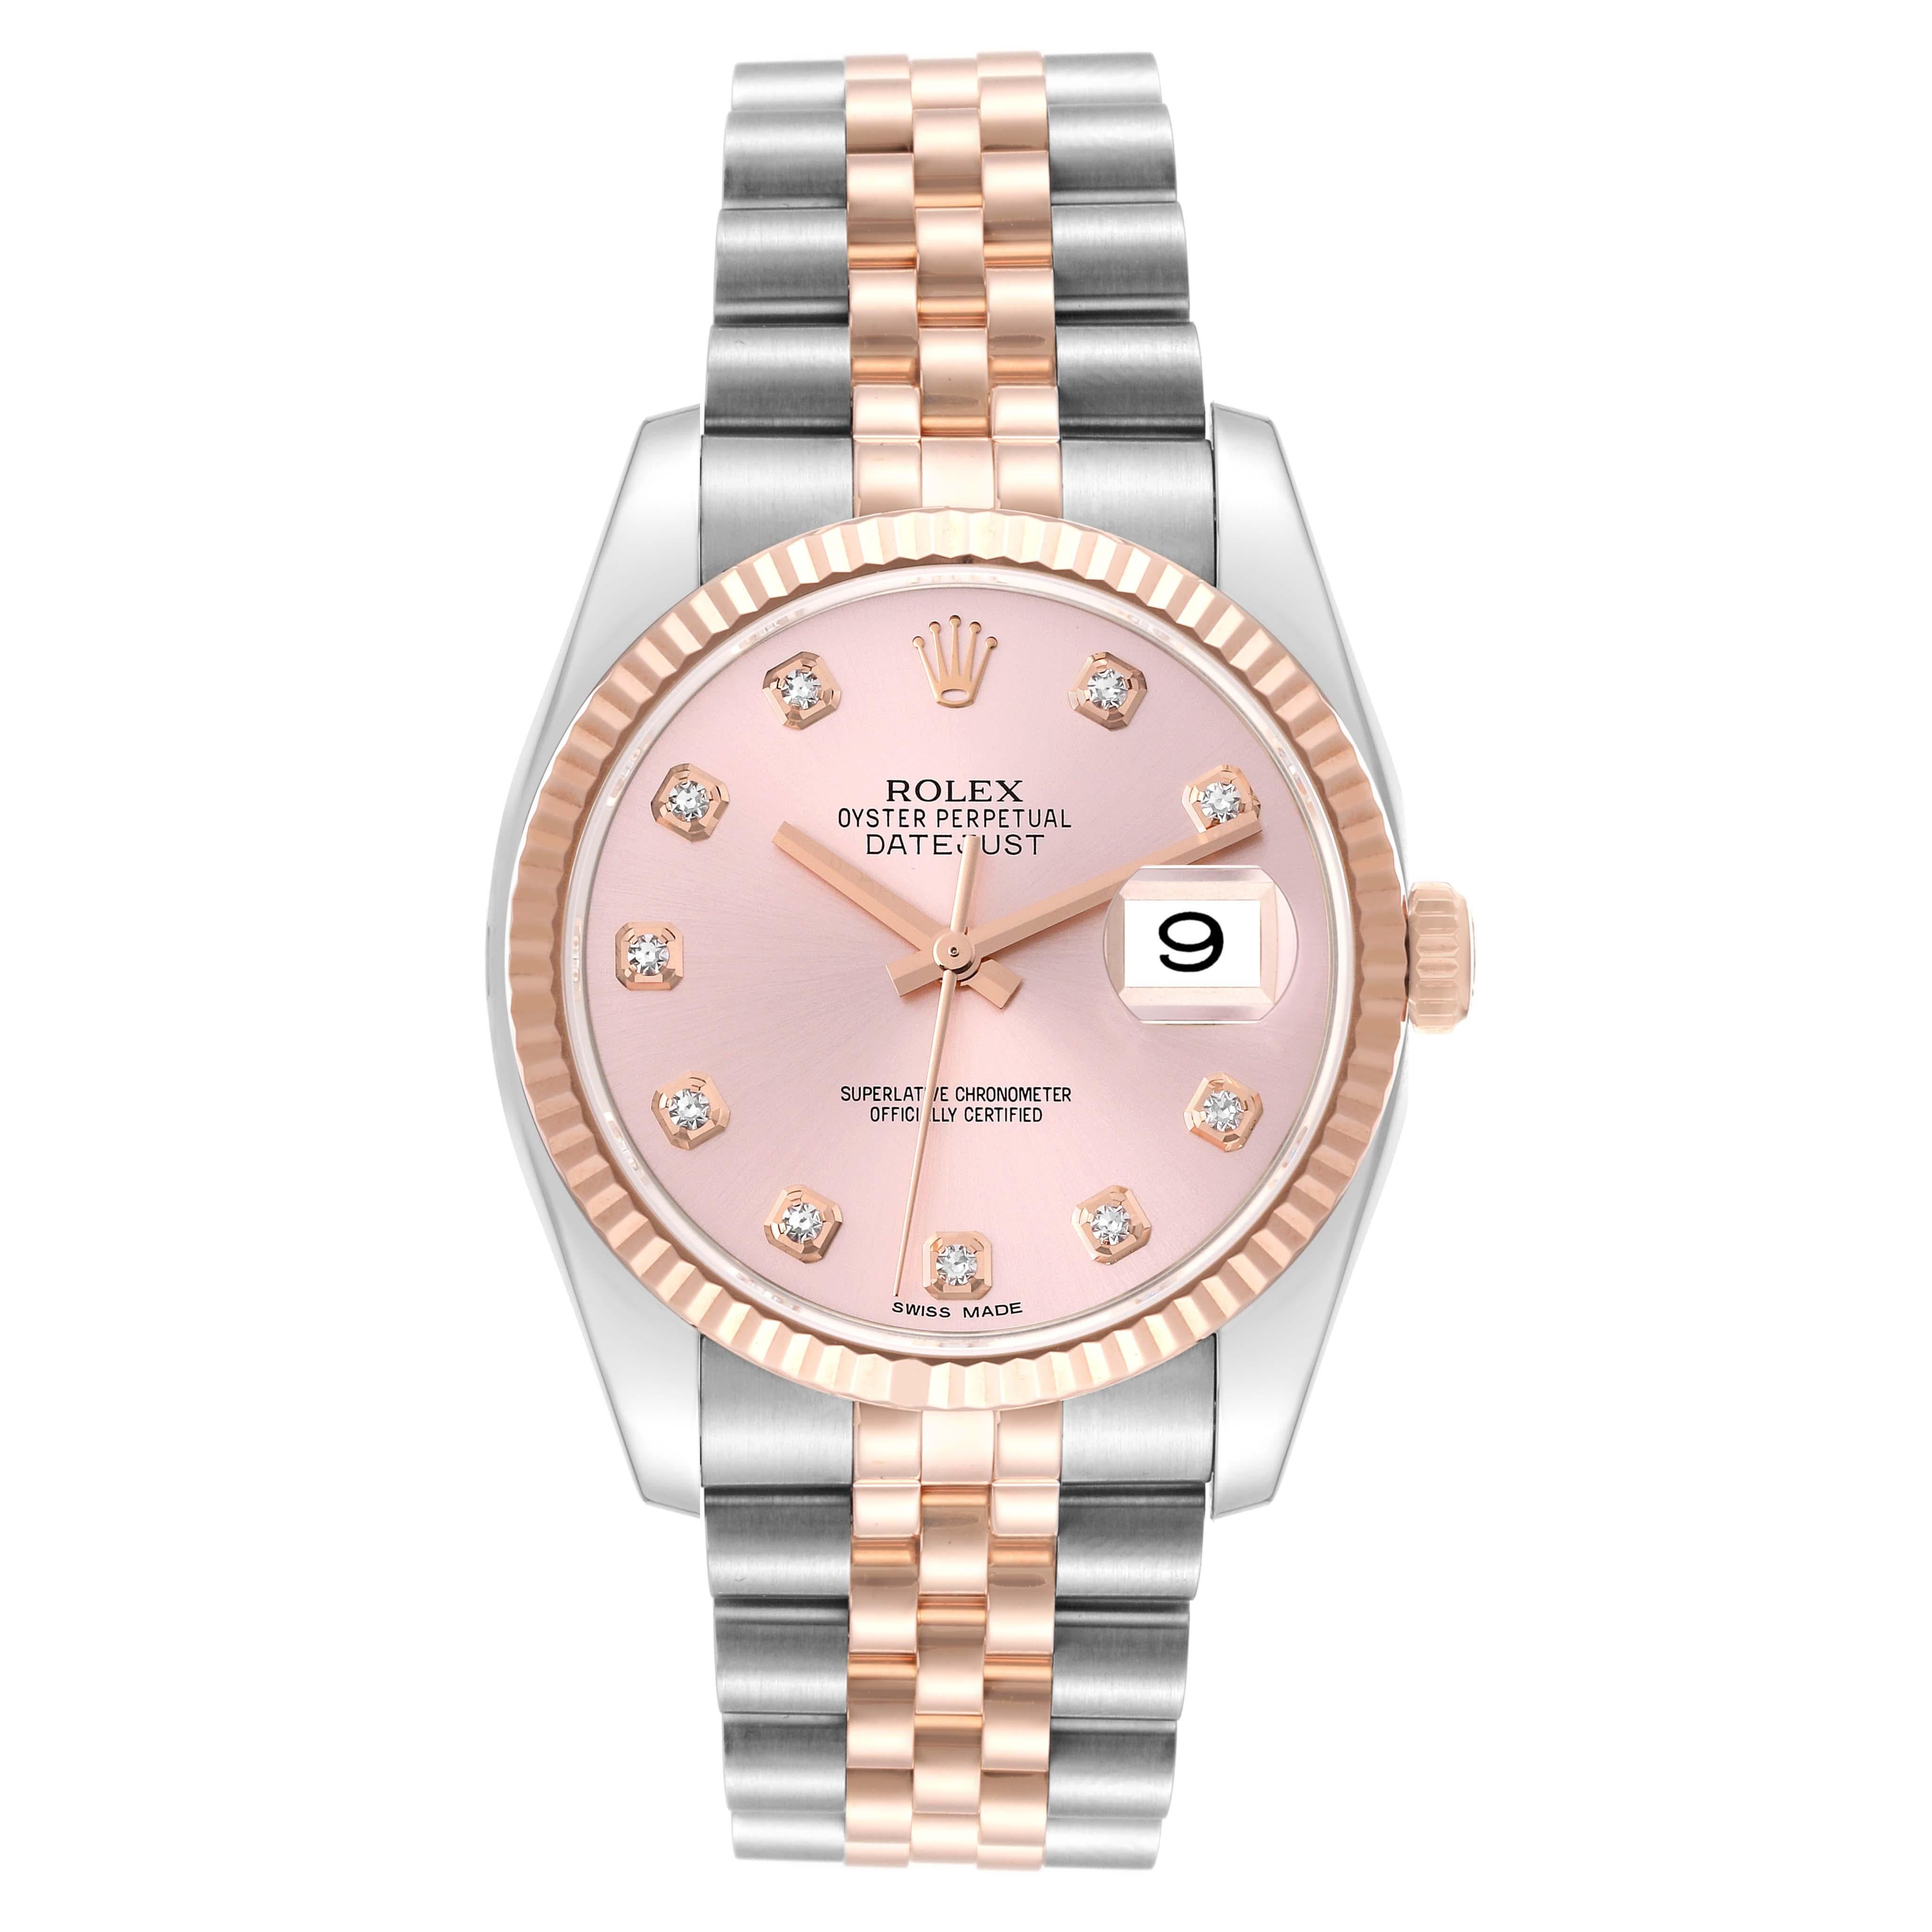 Rolex Datejust Steel Rose Gold Pink Diamond Dial Mens Watch 116231. Officially certified chronometer automatic self-winding movement. Stainless steel and 18k Everose gold case 36mm in diameter. Rolex logo on an 18k Everose gold crown. 18k rose gold